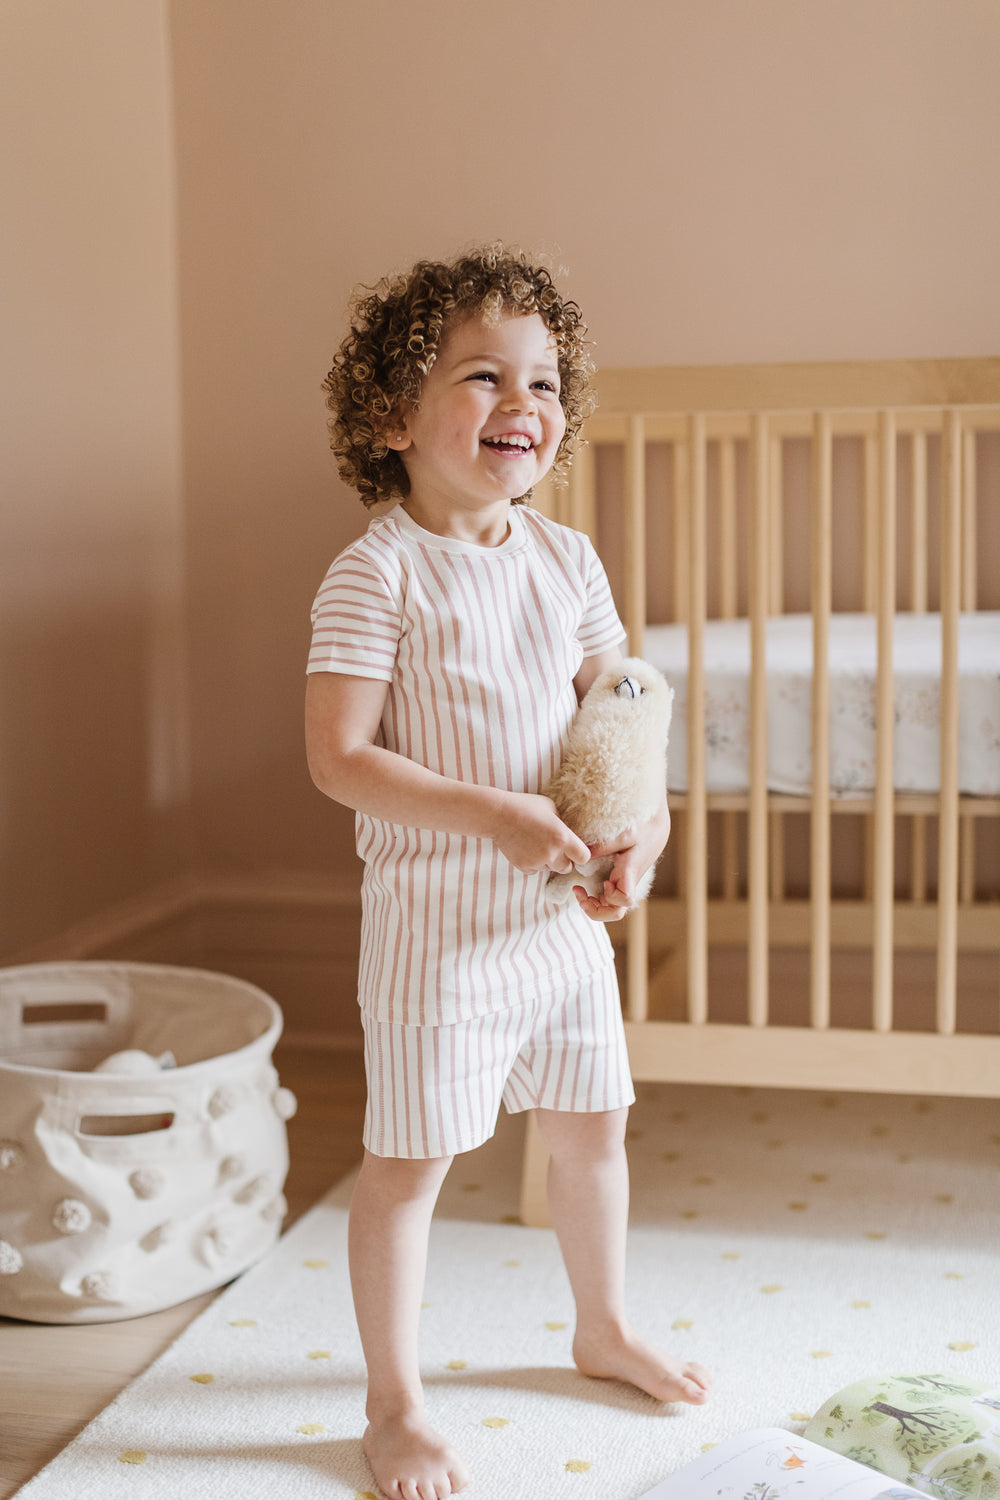 Thick And Warm 100% Cotton Thermal Pajama Set For Kids Long John Cotton  Sleepwear For Boys And Girls, Ideal For Winter And Teenage Sleep 210622  From Cong05, $16.83